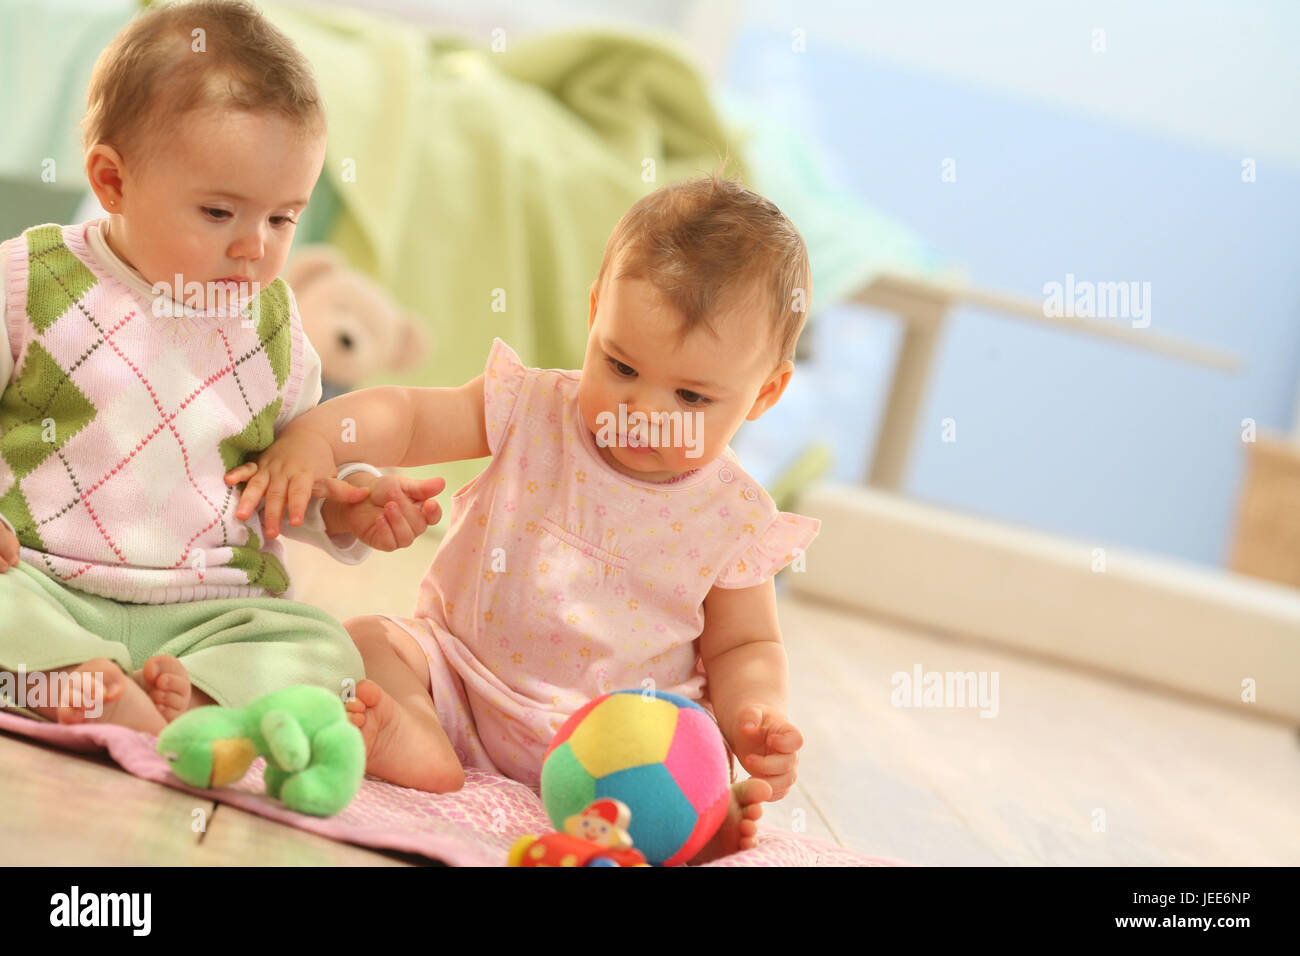 two babies, game group, social behaviour, toys, share, try out, Stock Photo